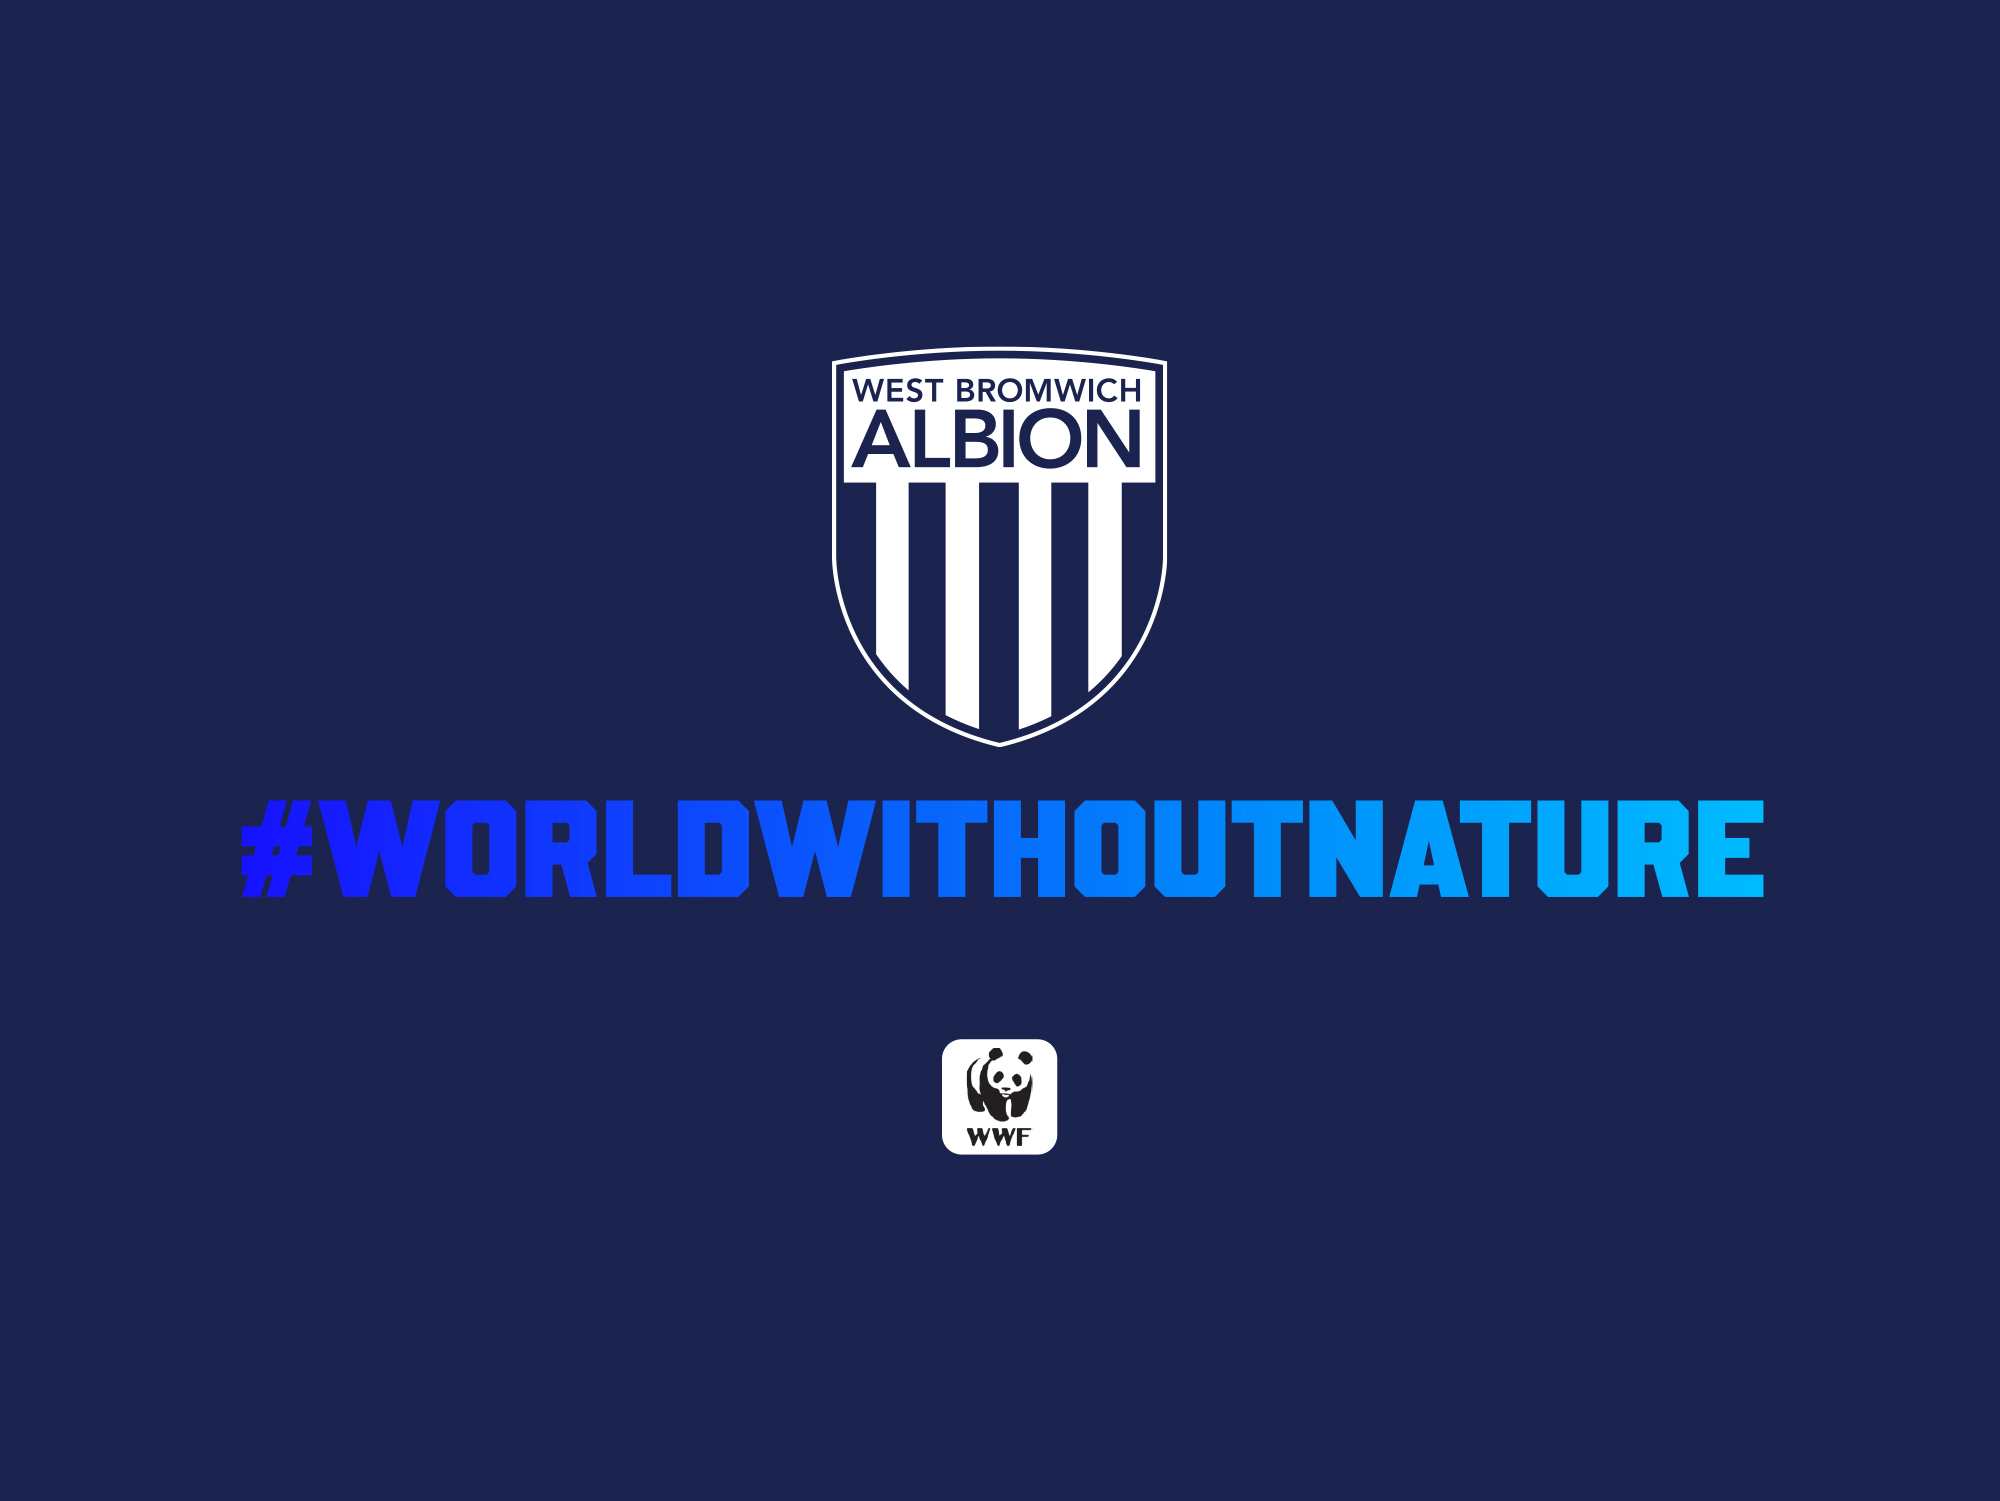 WBA's WWF's World Without Nature campaign graphic with an image of the Albion badge without the throstle bird and The Hawthorns bush